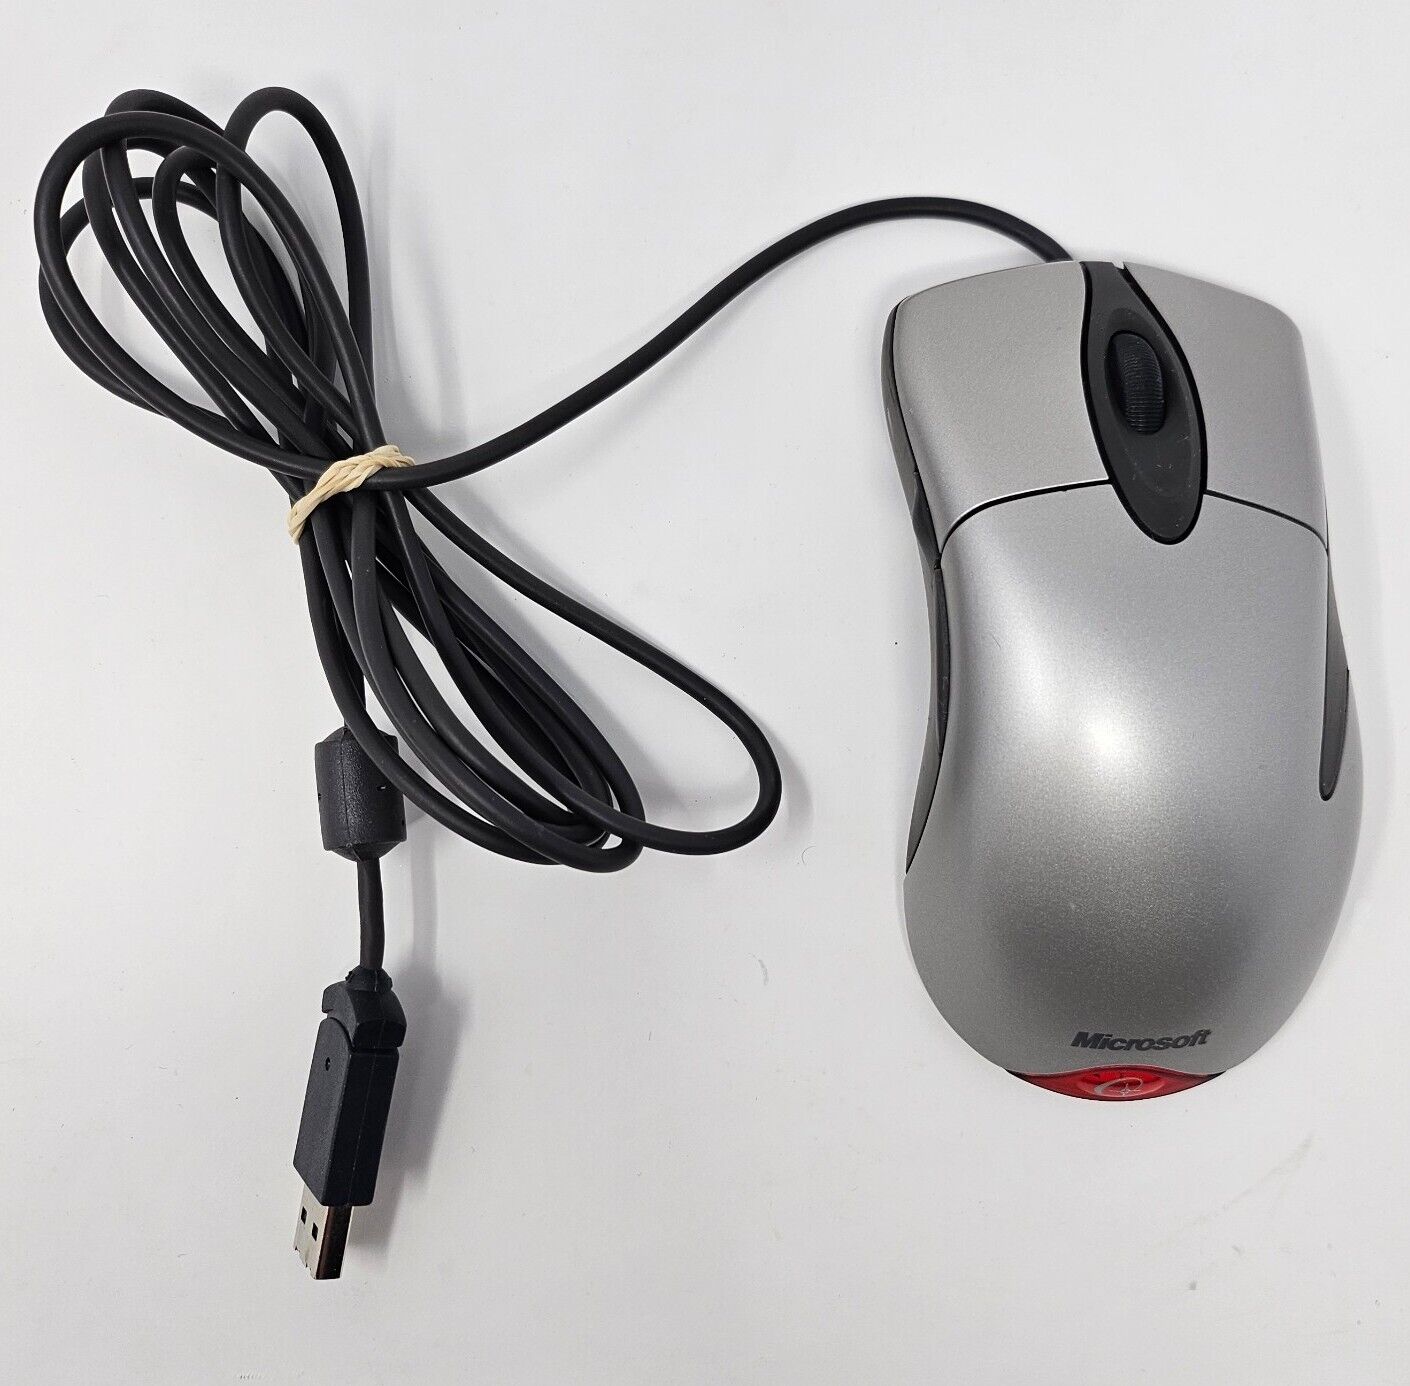 Microsoft IntelliMouse Explorer USB 3.0 Wired Optical Mouse P/N X08-70387